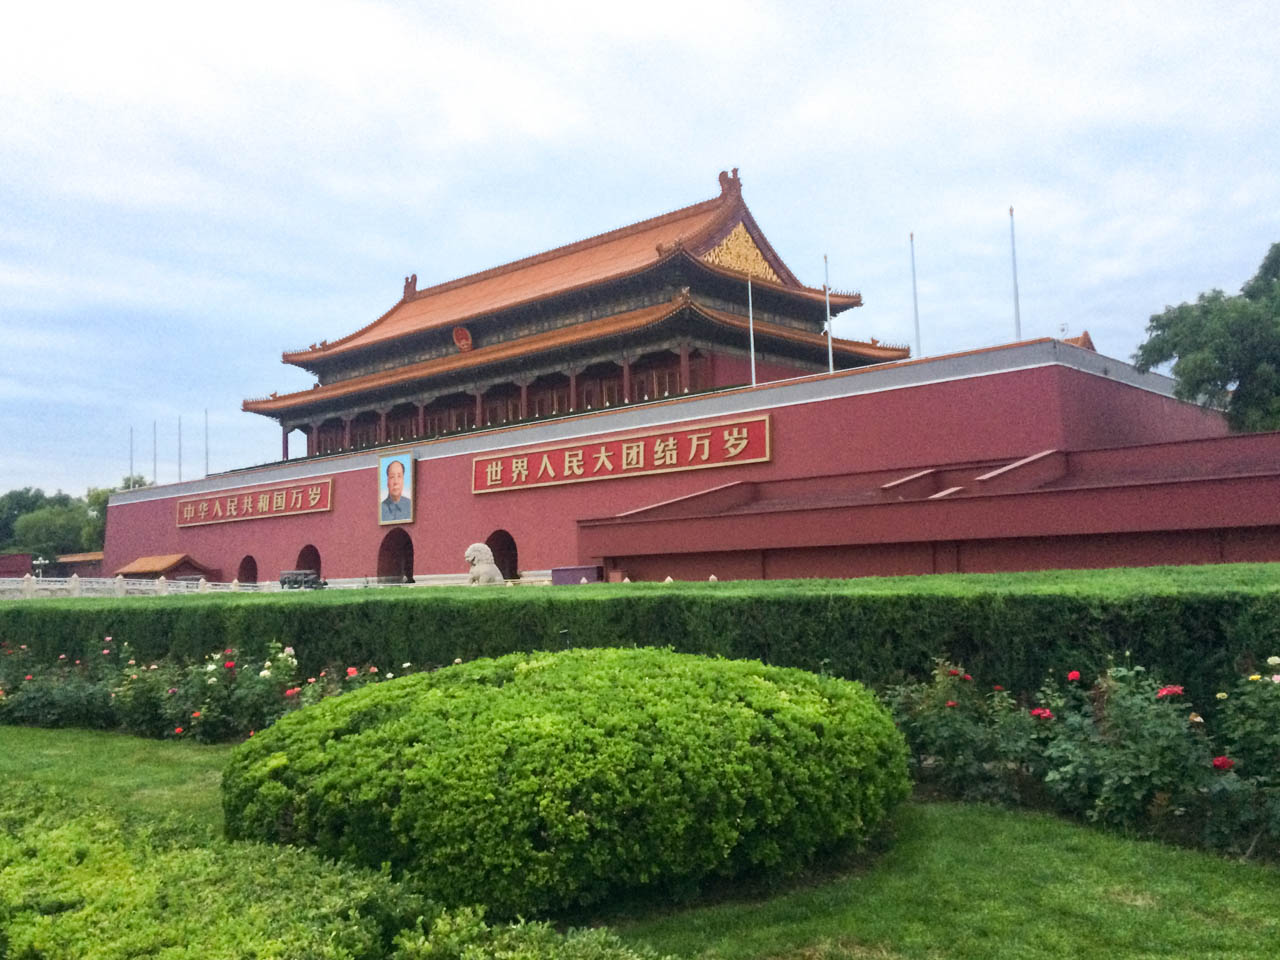 Hedges and rose bushes outside the Tiananmen Gate in Beijing, China